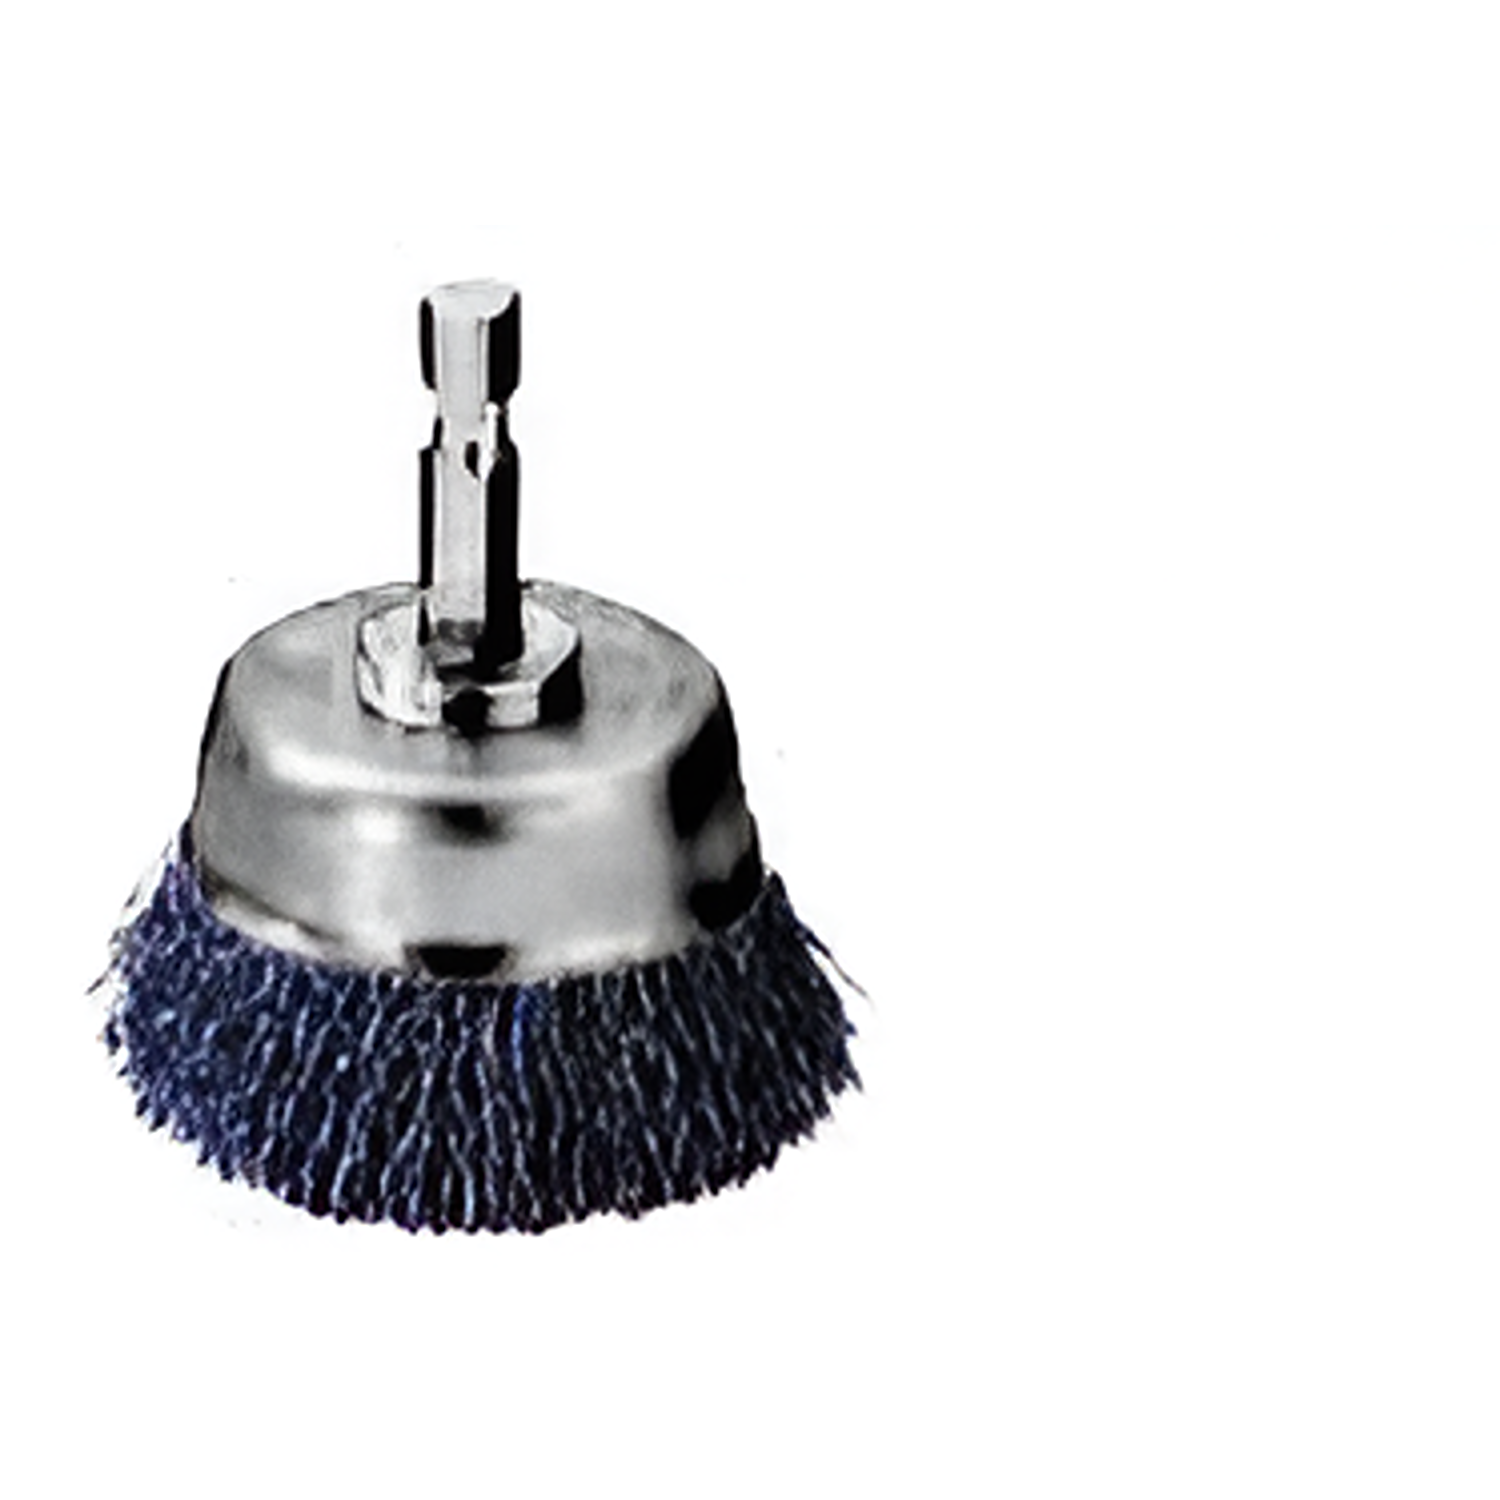 YEW AIK AE01182 NKS Stainless Steel Cup Brush with Shank - Premium Cup Brush from YEW AIK - Shop now at Yew Aik.